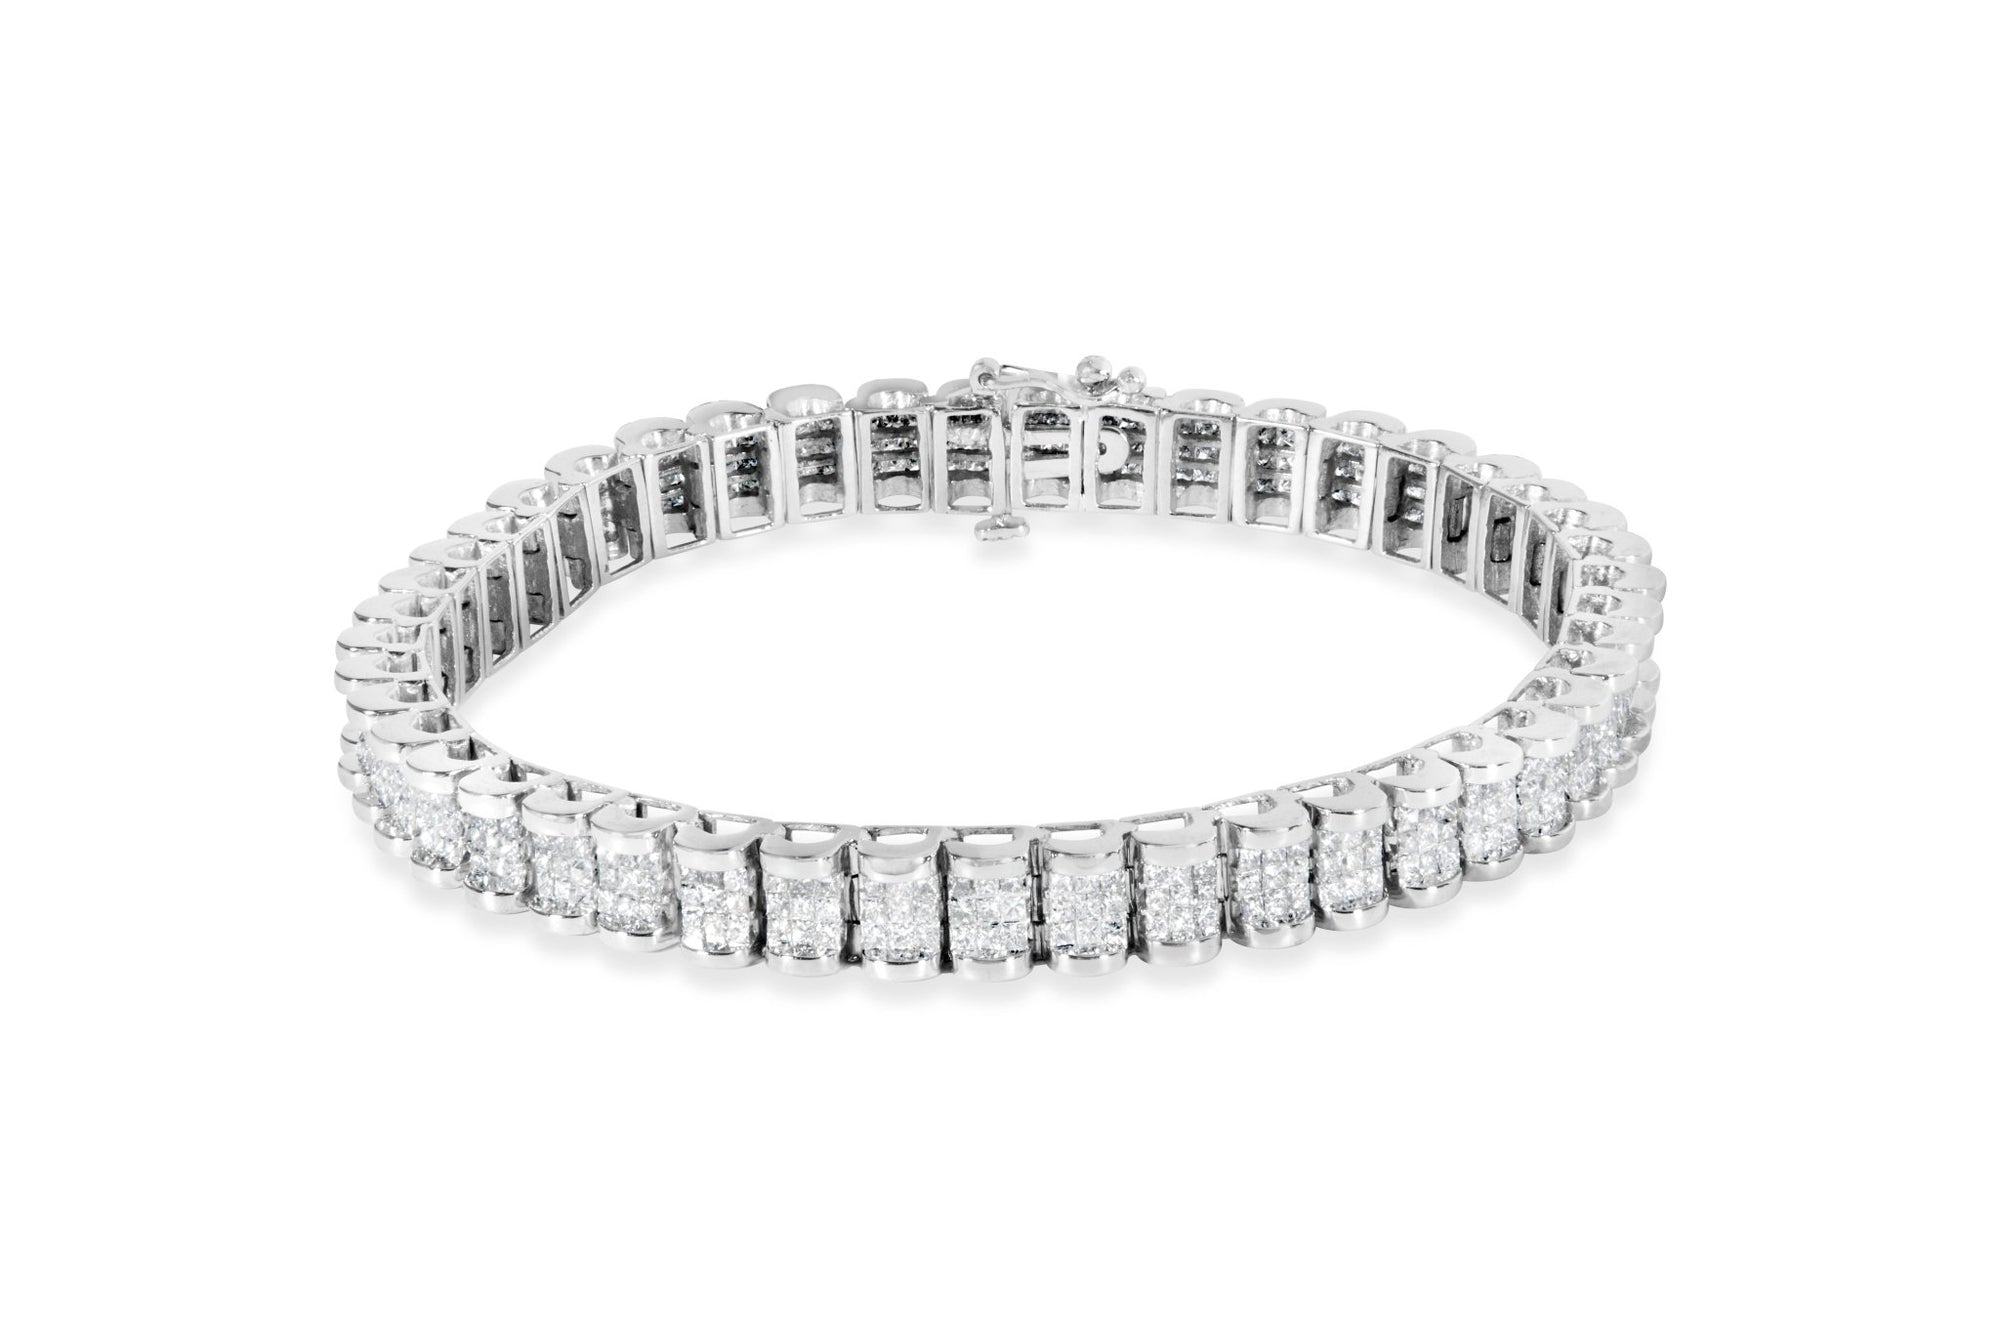 14K White Gold 5.00 Cttw Invisible Set Princess-Cut Diamond Belt and Buckle Tennis 7" Bracelet (H-I Color, SI1-SI2 Clarity) - LinkagejewelrydesignLinkagejewelrydesign